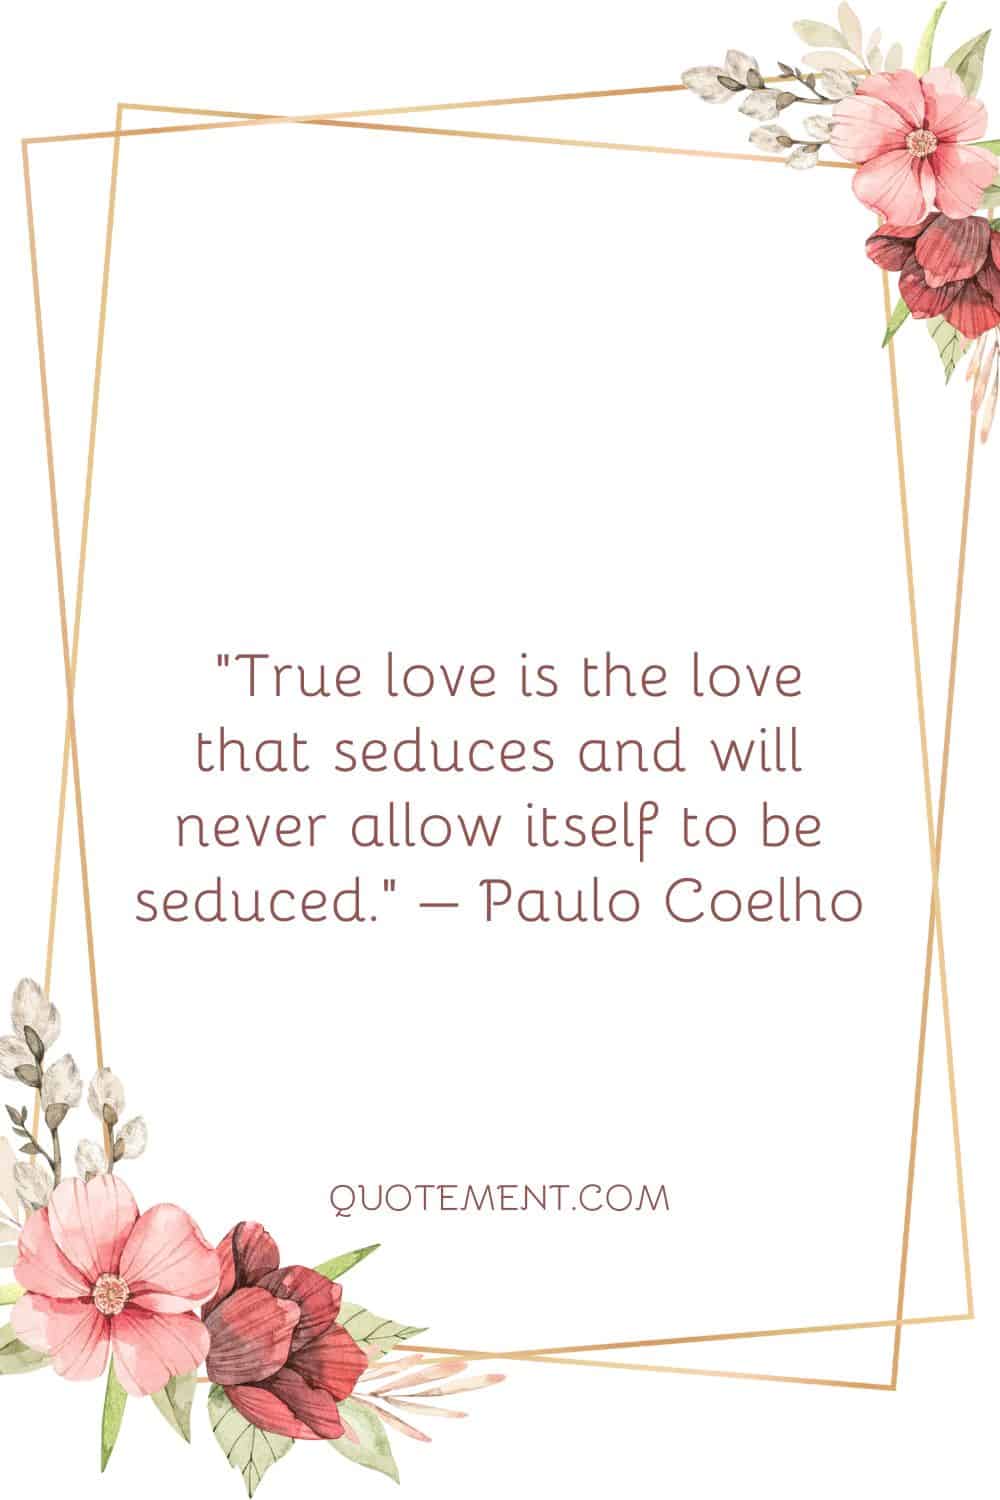 True love is the love that seduces and will never allow itself to be seduced